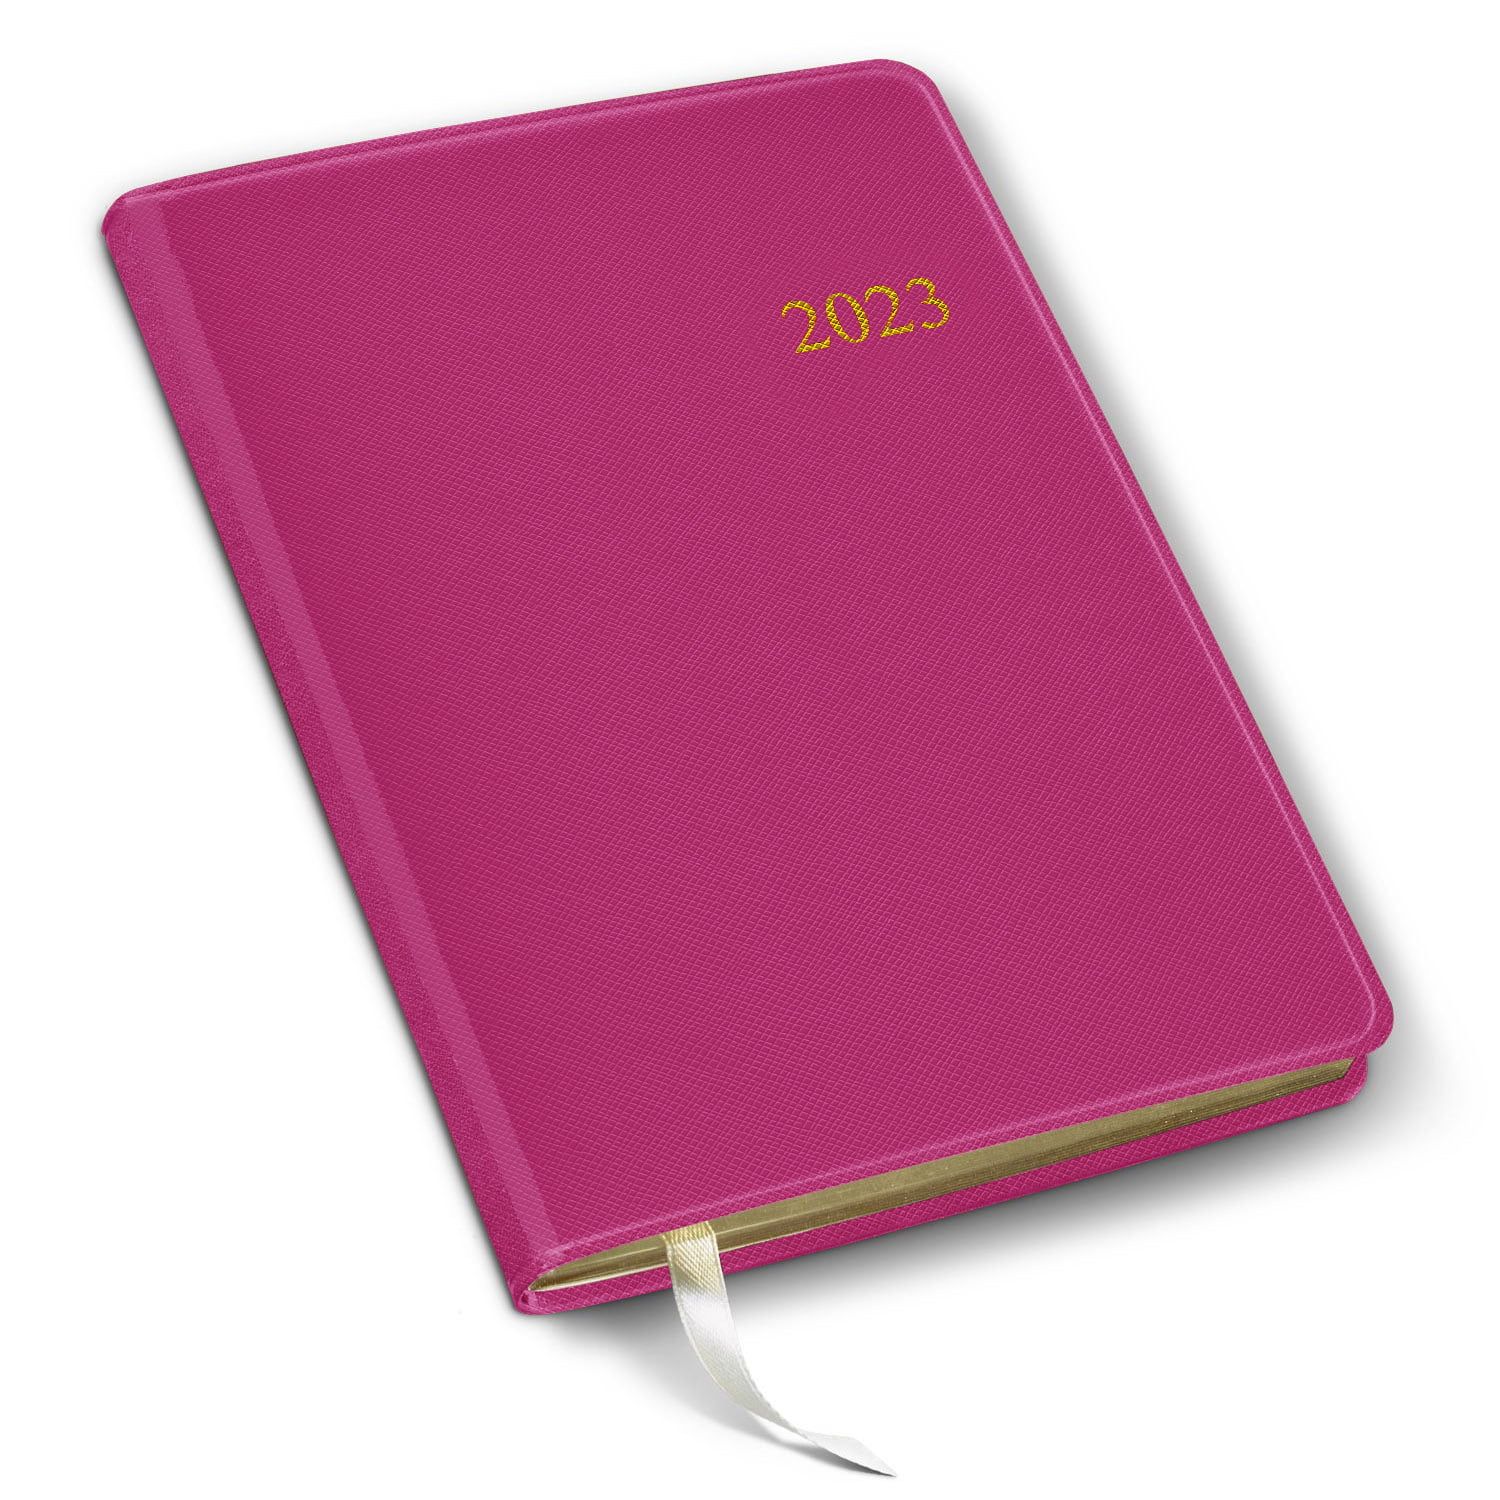 - 6x3.25 Pocket Address Book by Gallery Leather Key West Honeysuckle Pink 